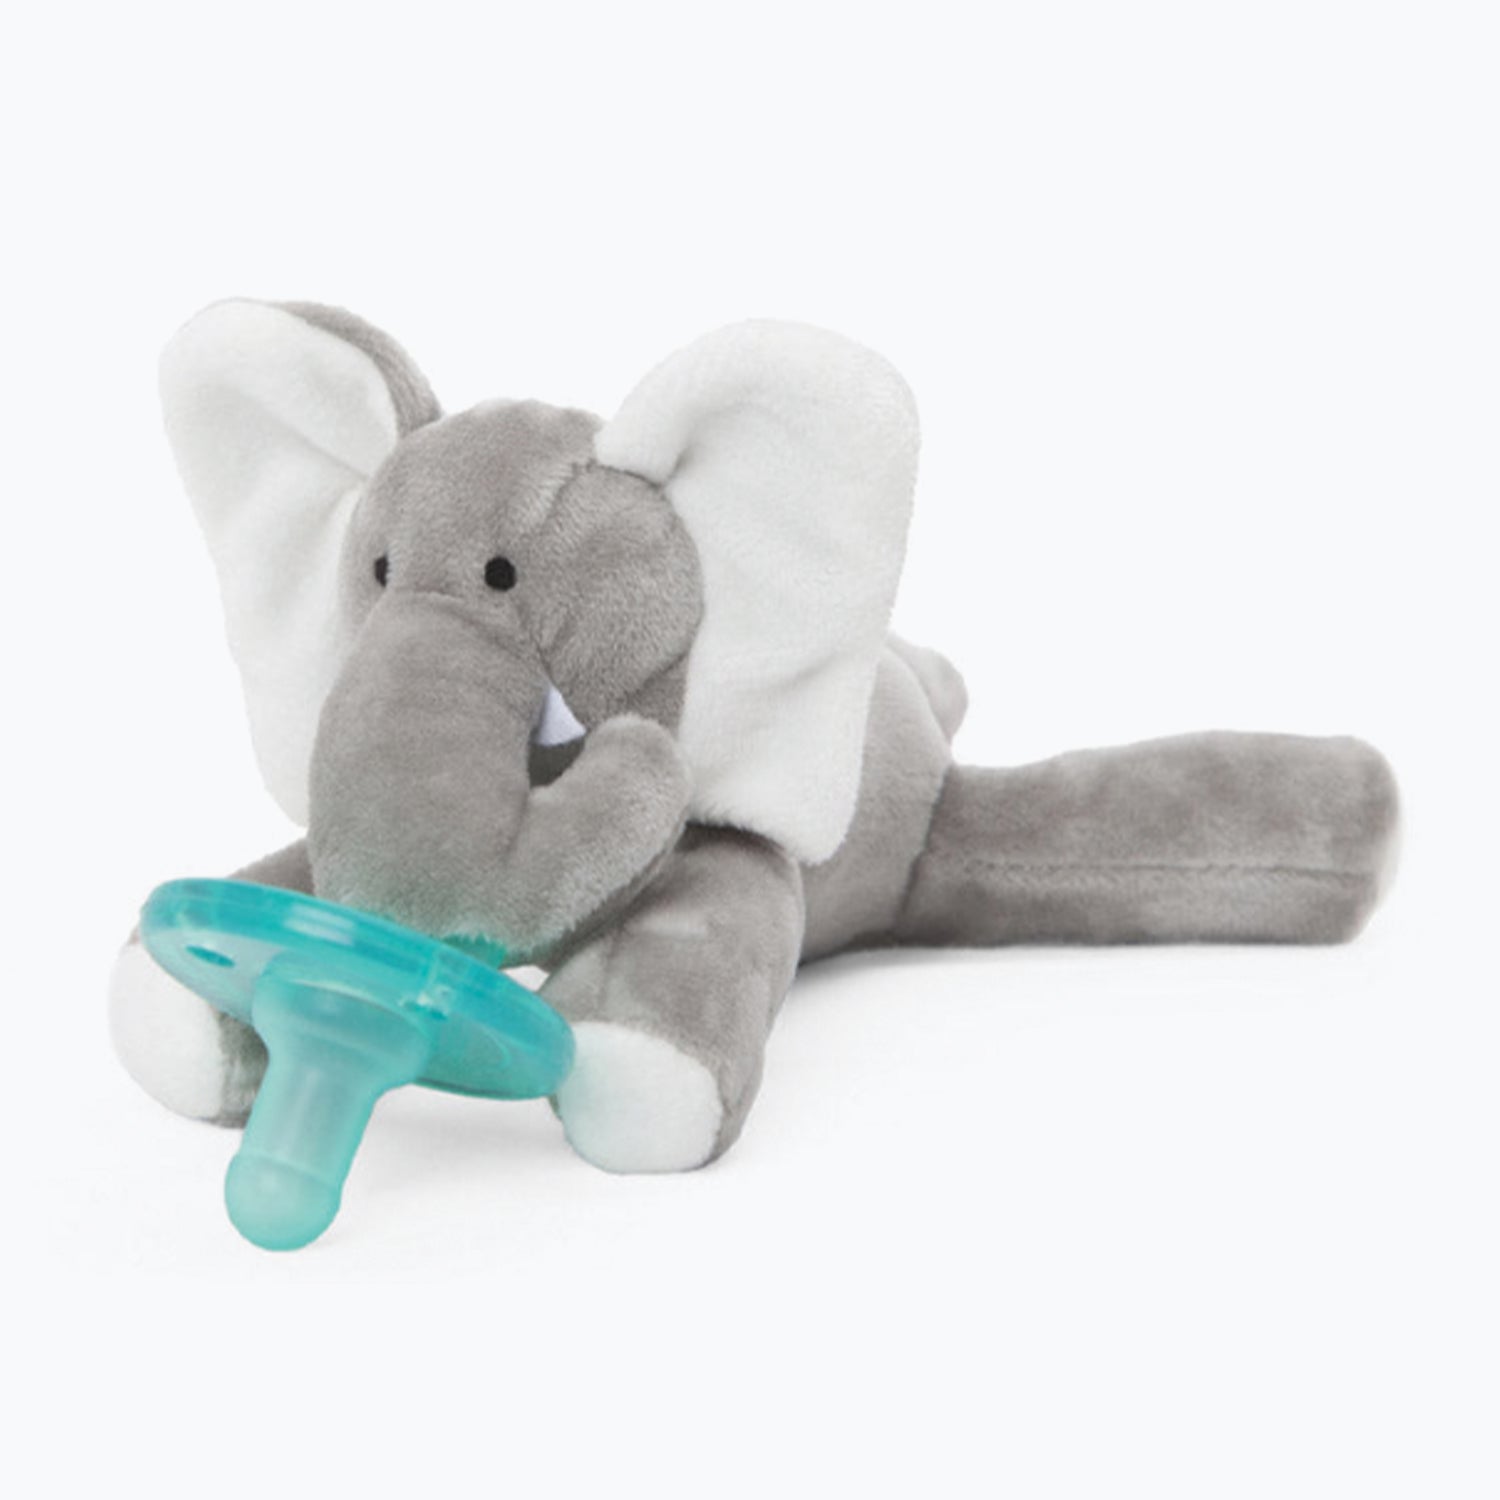 An image of Baby Pacifier - Pacifier and Comforter Toys - Elephant | WubbaNub